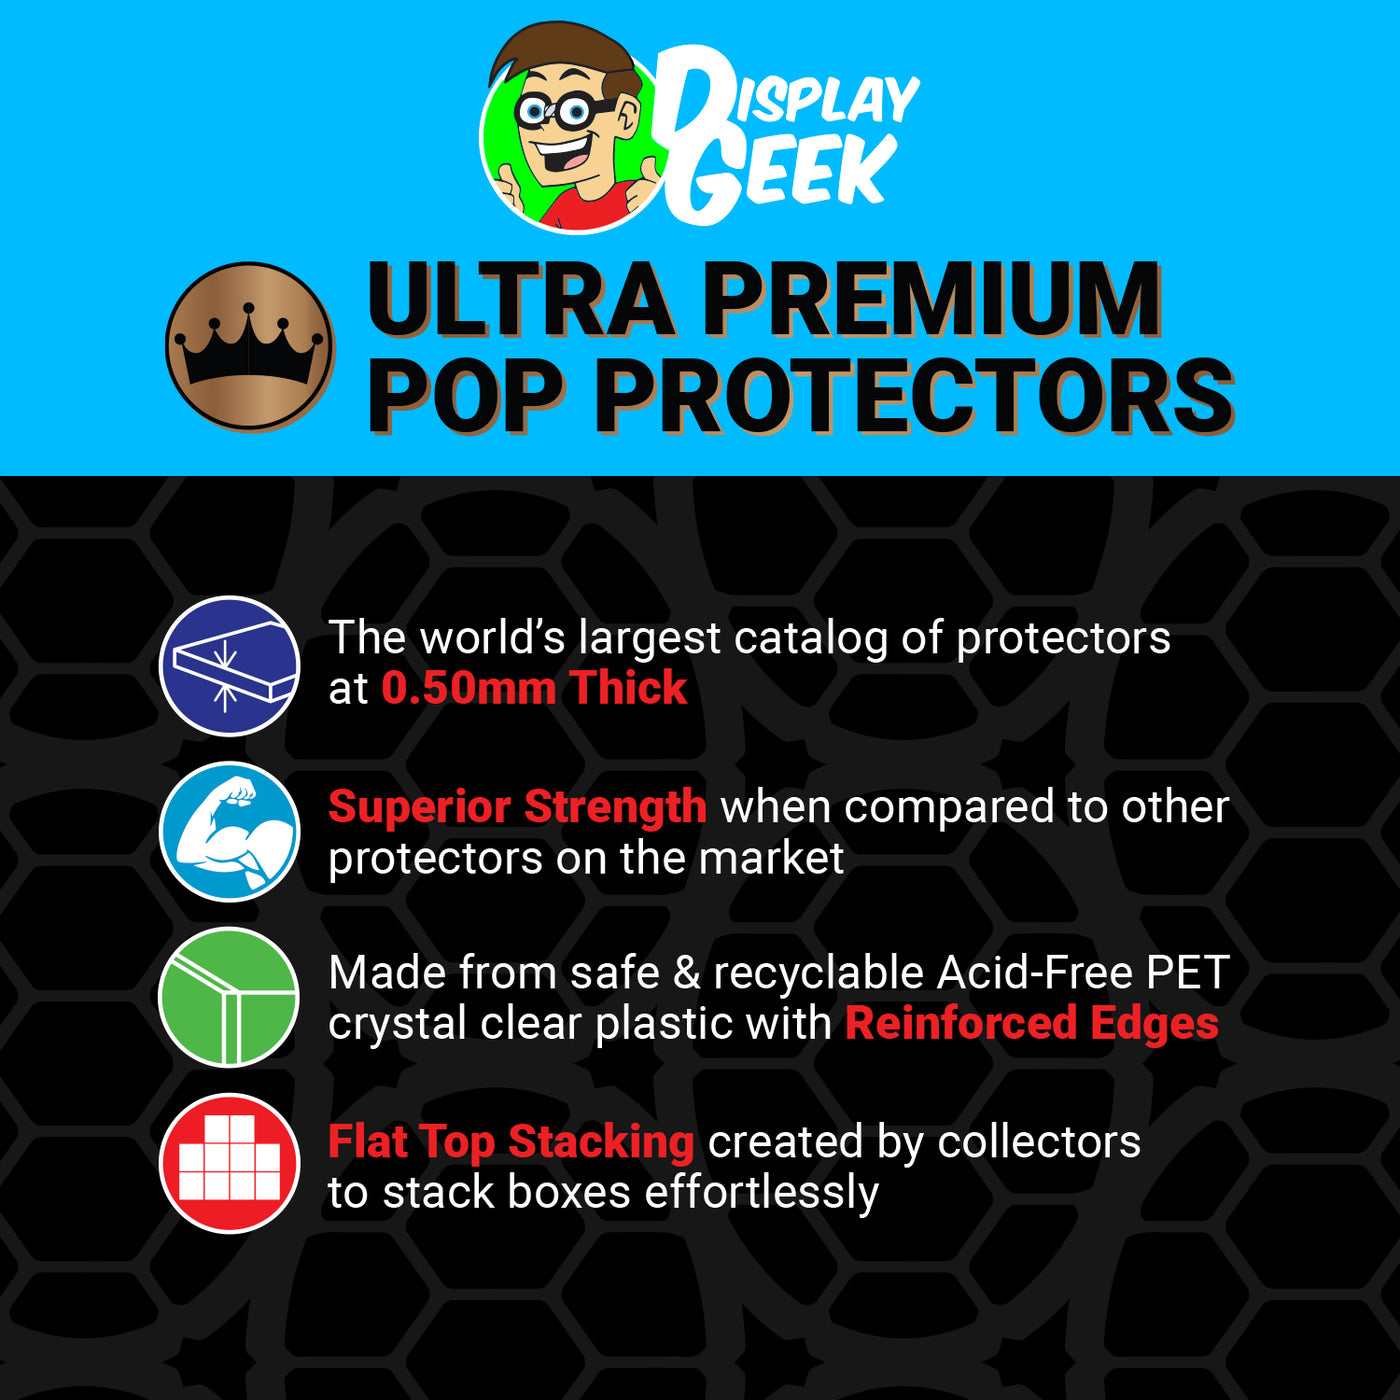 Pop Protector for 2 Pack Bob & Roller Skating Stuart Funko Pocket Pop Keychains on The Protector Guide App by Display Geek